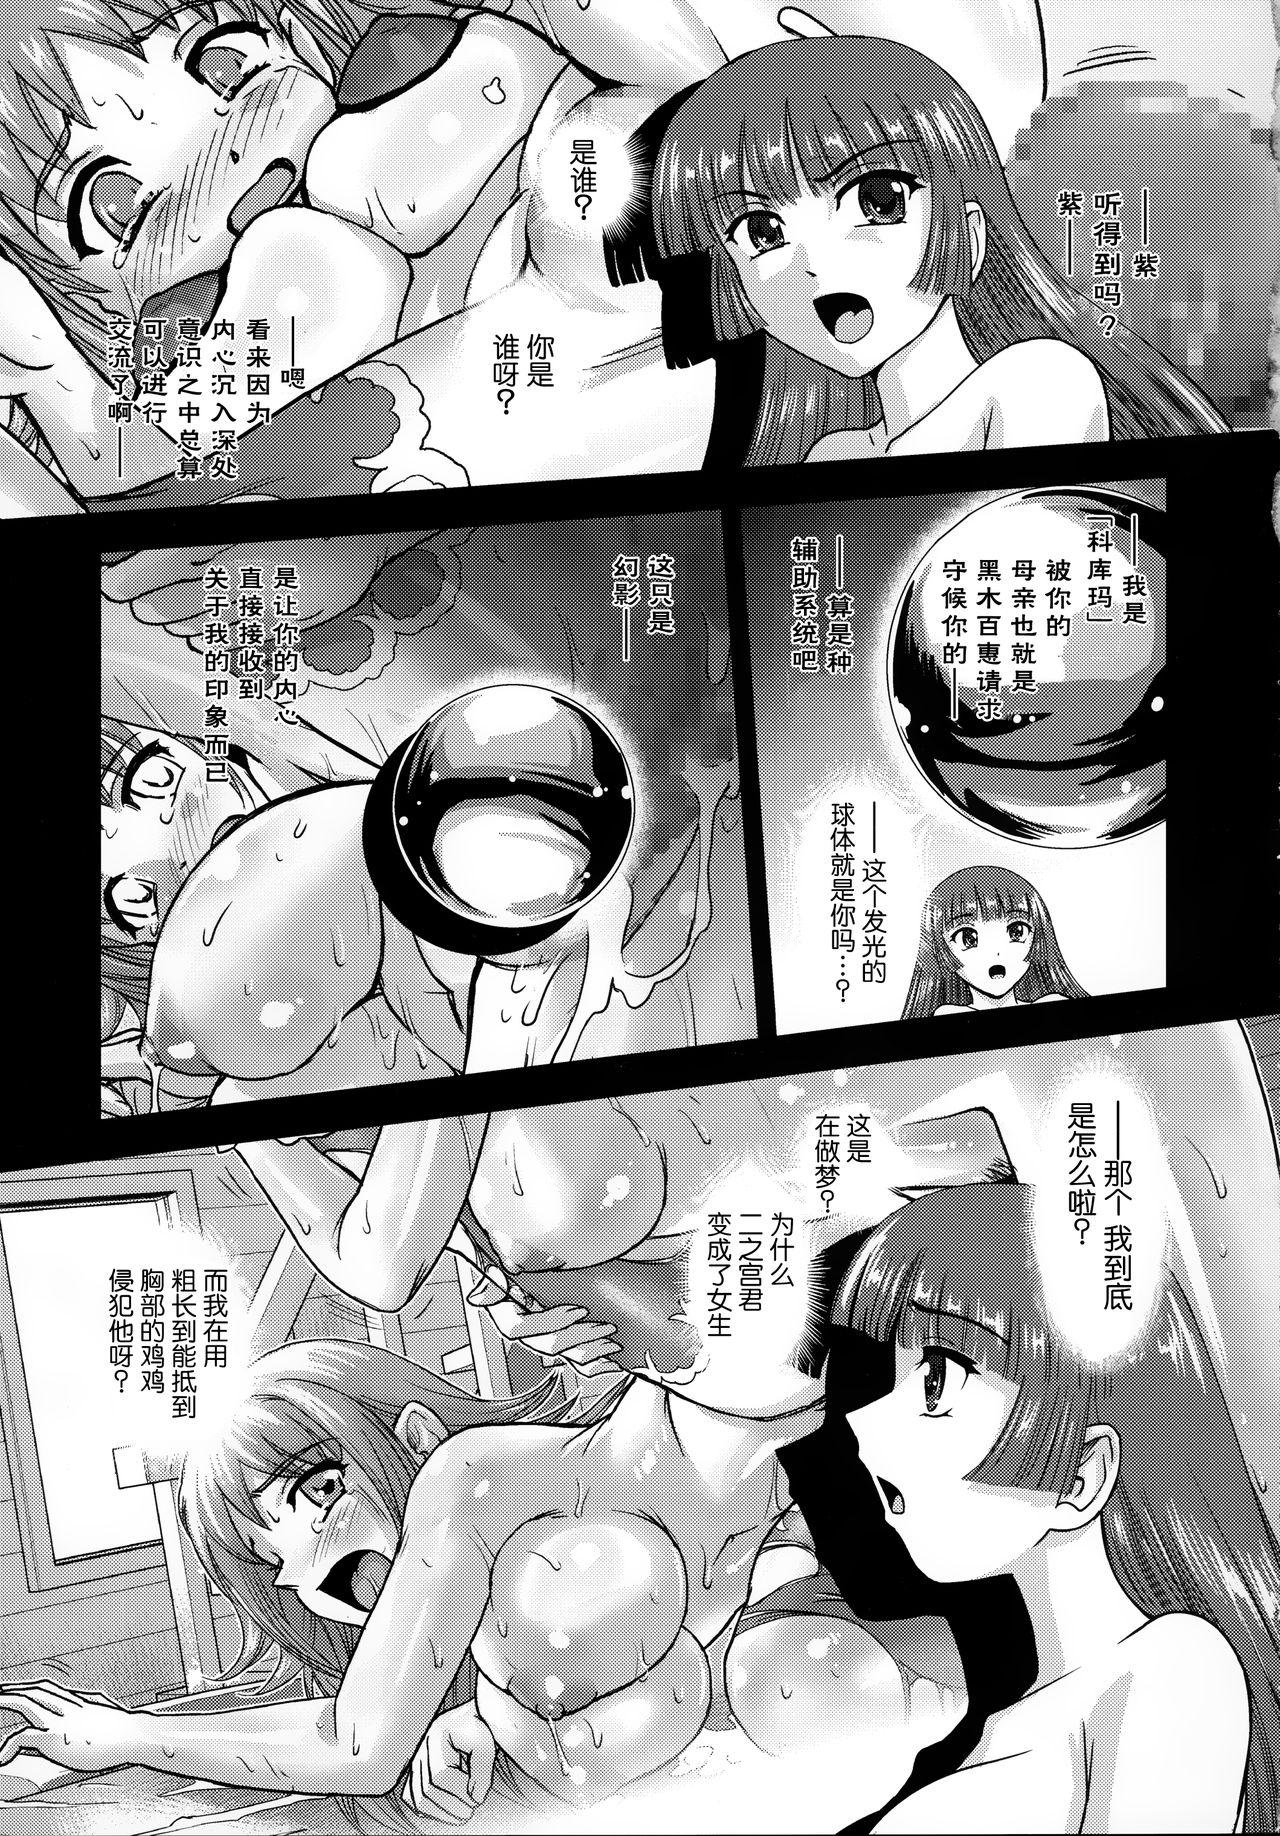 European (C95) [Behind Moon (Dulce-Q)] DR:II ep.7 ~Dulce Report~ | 达西报告II Ep.7 [Chinese] [鬼畜王汉化组] - Original Sexteen - Page 5